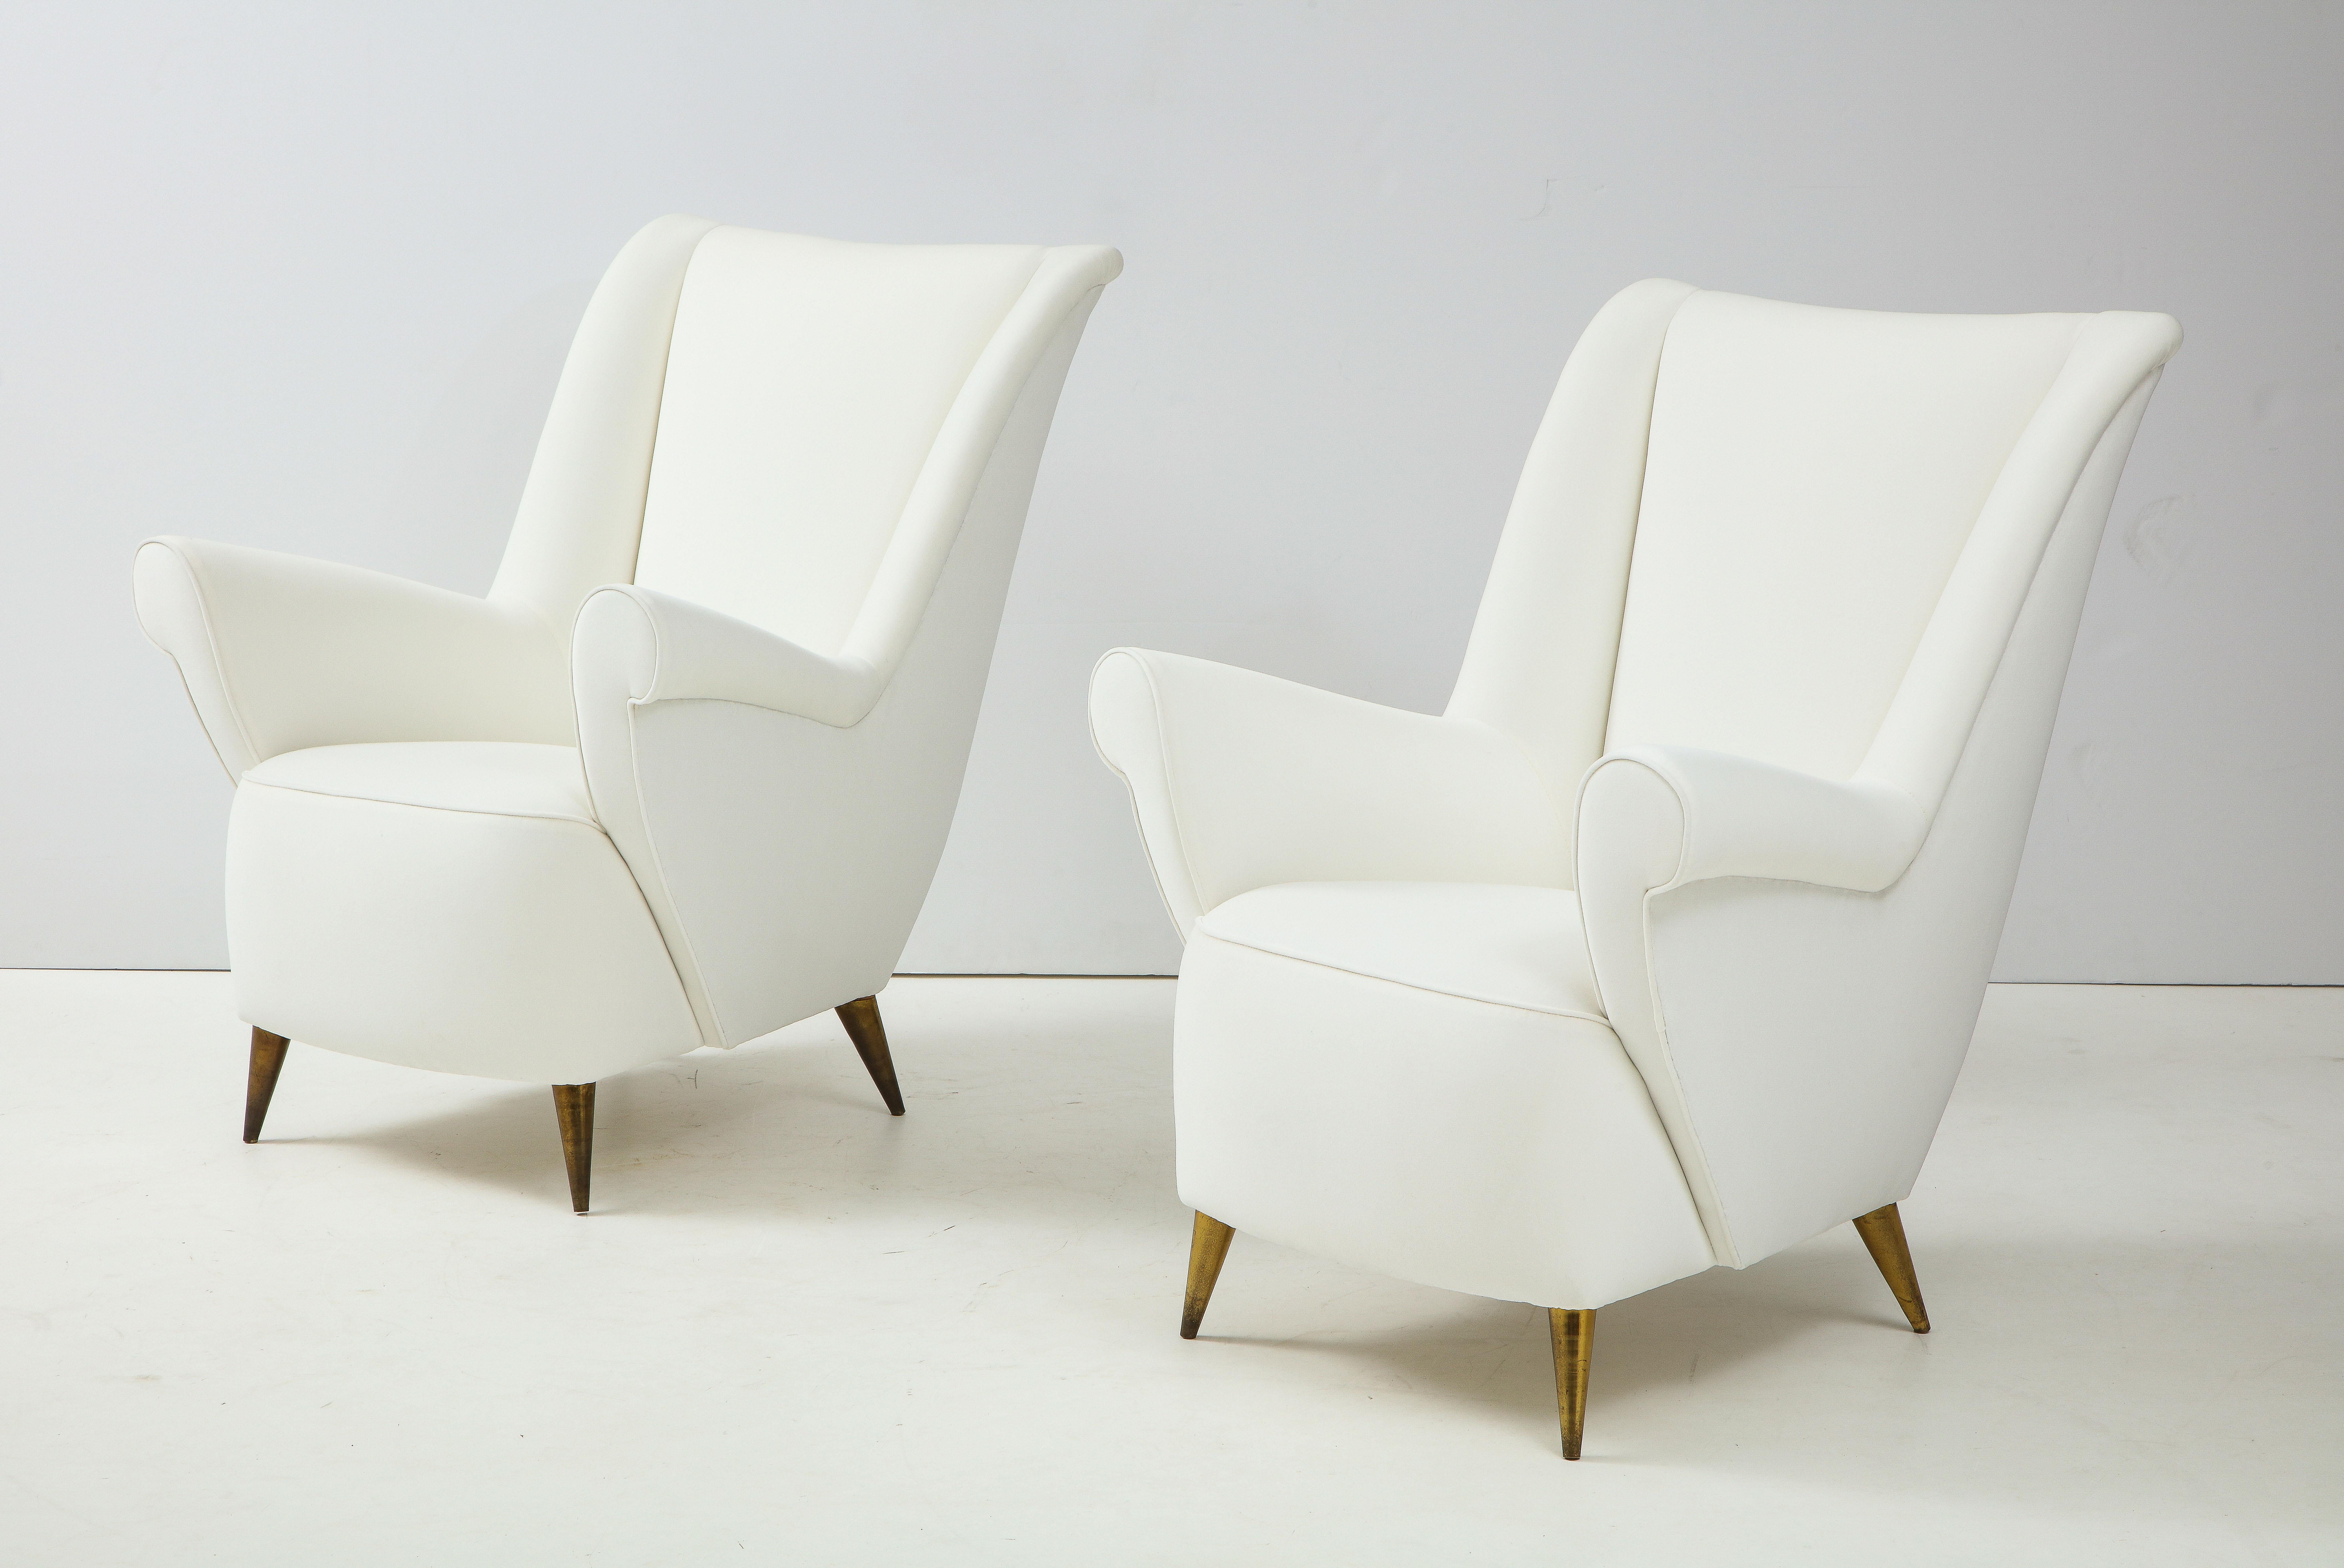 A stunning pair of Italian vintage lounge or high back chairs designed by Gio Ponti in 1955 for Editions ISA, Bergamo. These elegant chairs feature high backs, a sculpted profile, and refined, sensuous lines designed for deep comfort. The seats are